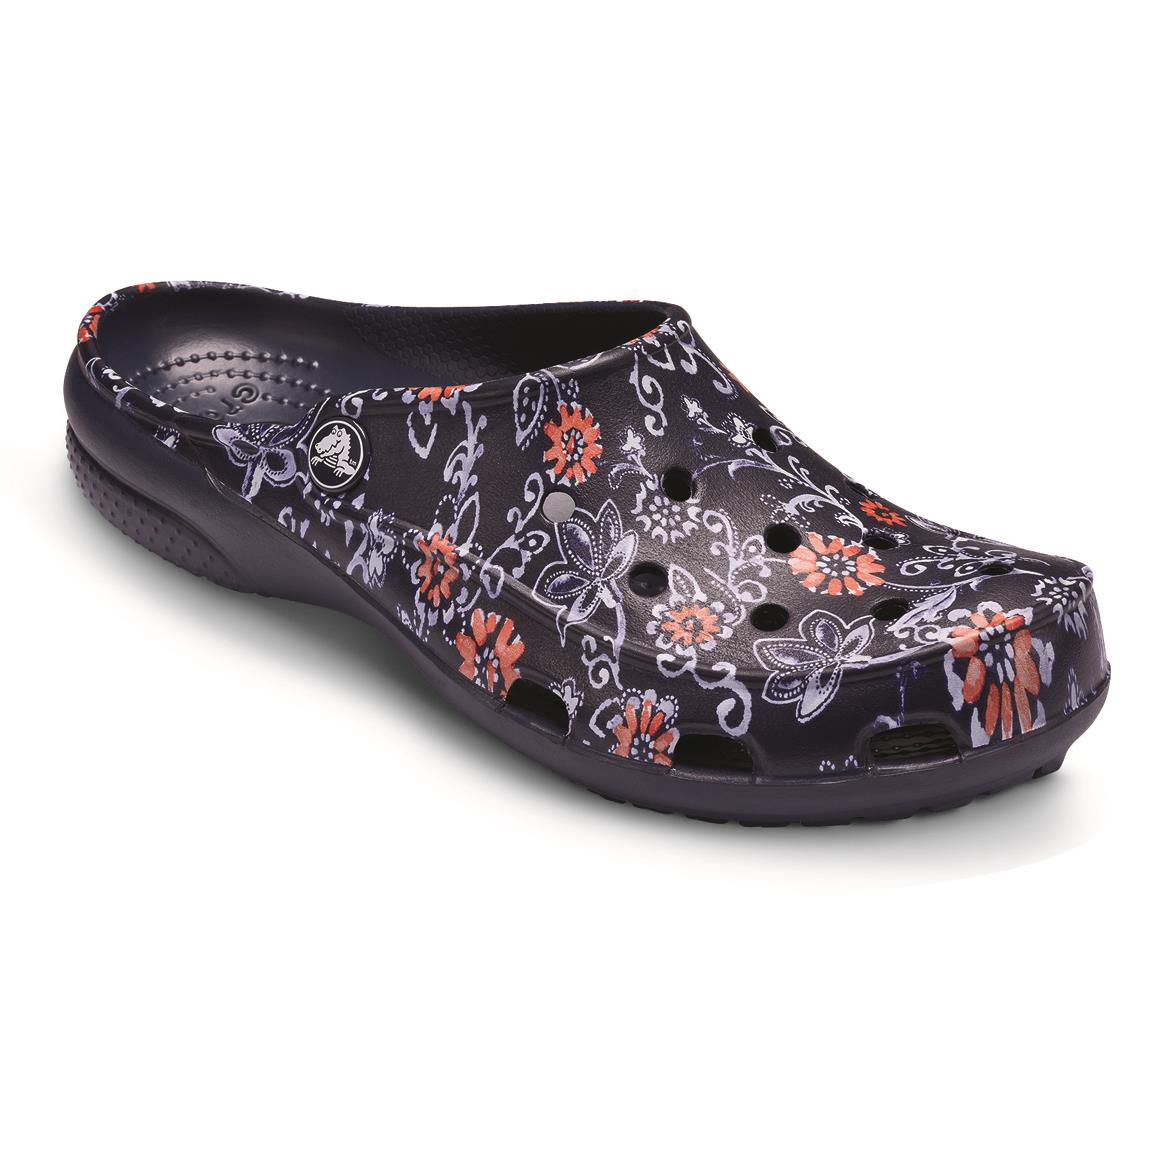  Crocs  Women s  Freesail Clogs 654248 Casual Shoes  at 